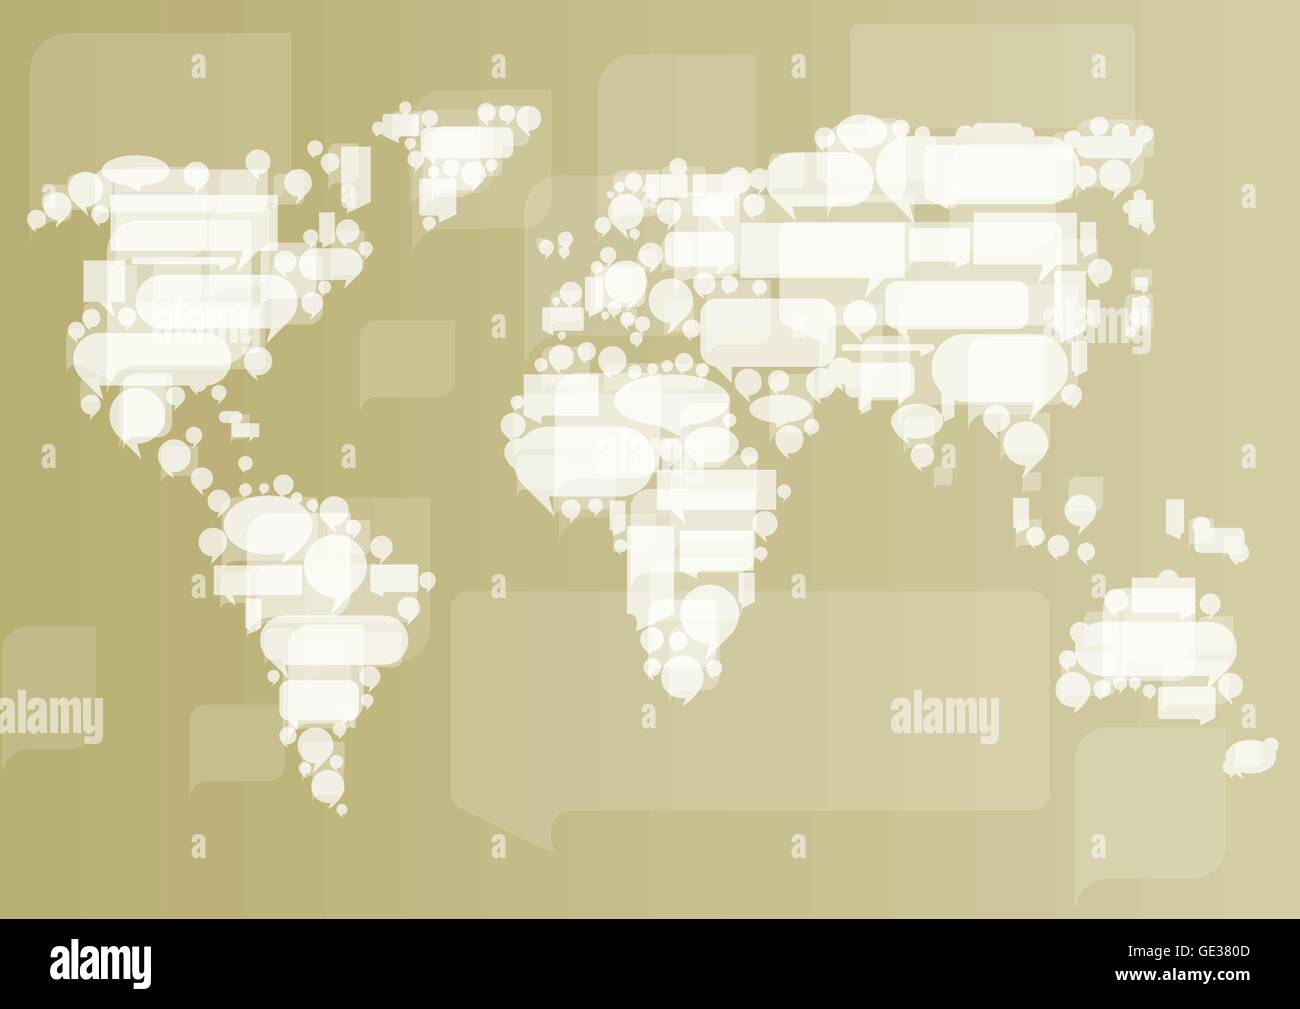 Globalization concept of business and communication vector background concept made of World map and speech bubbles Stock Vector